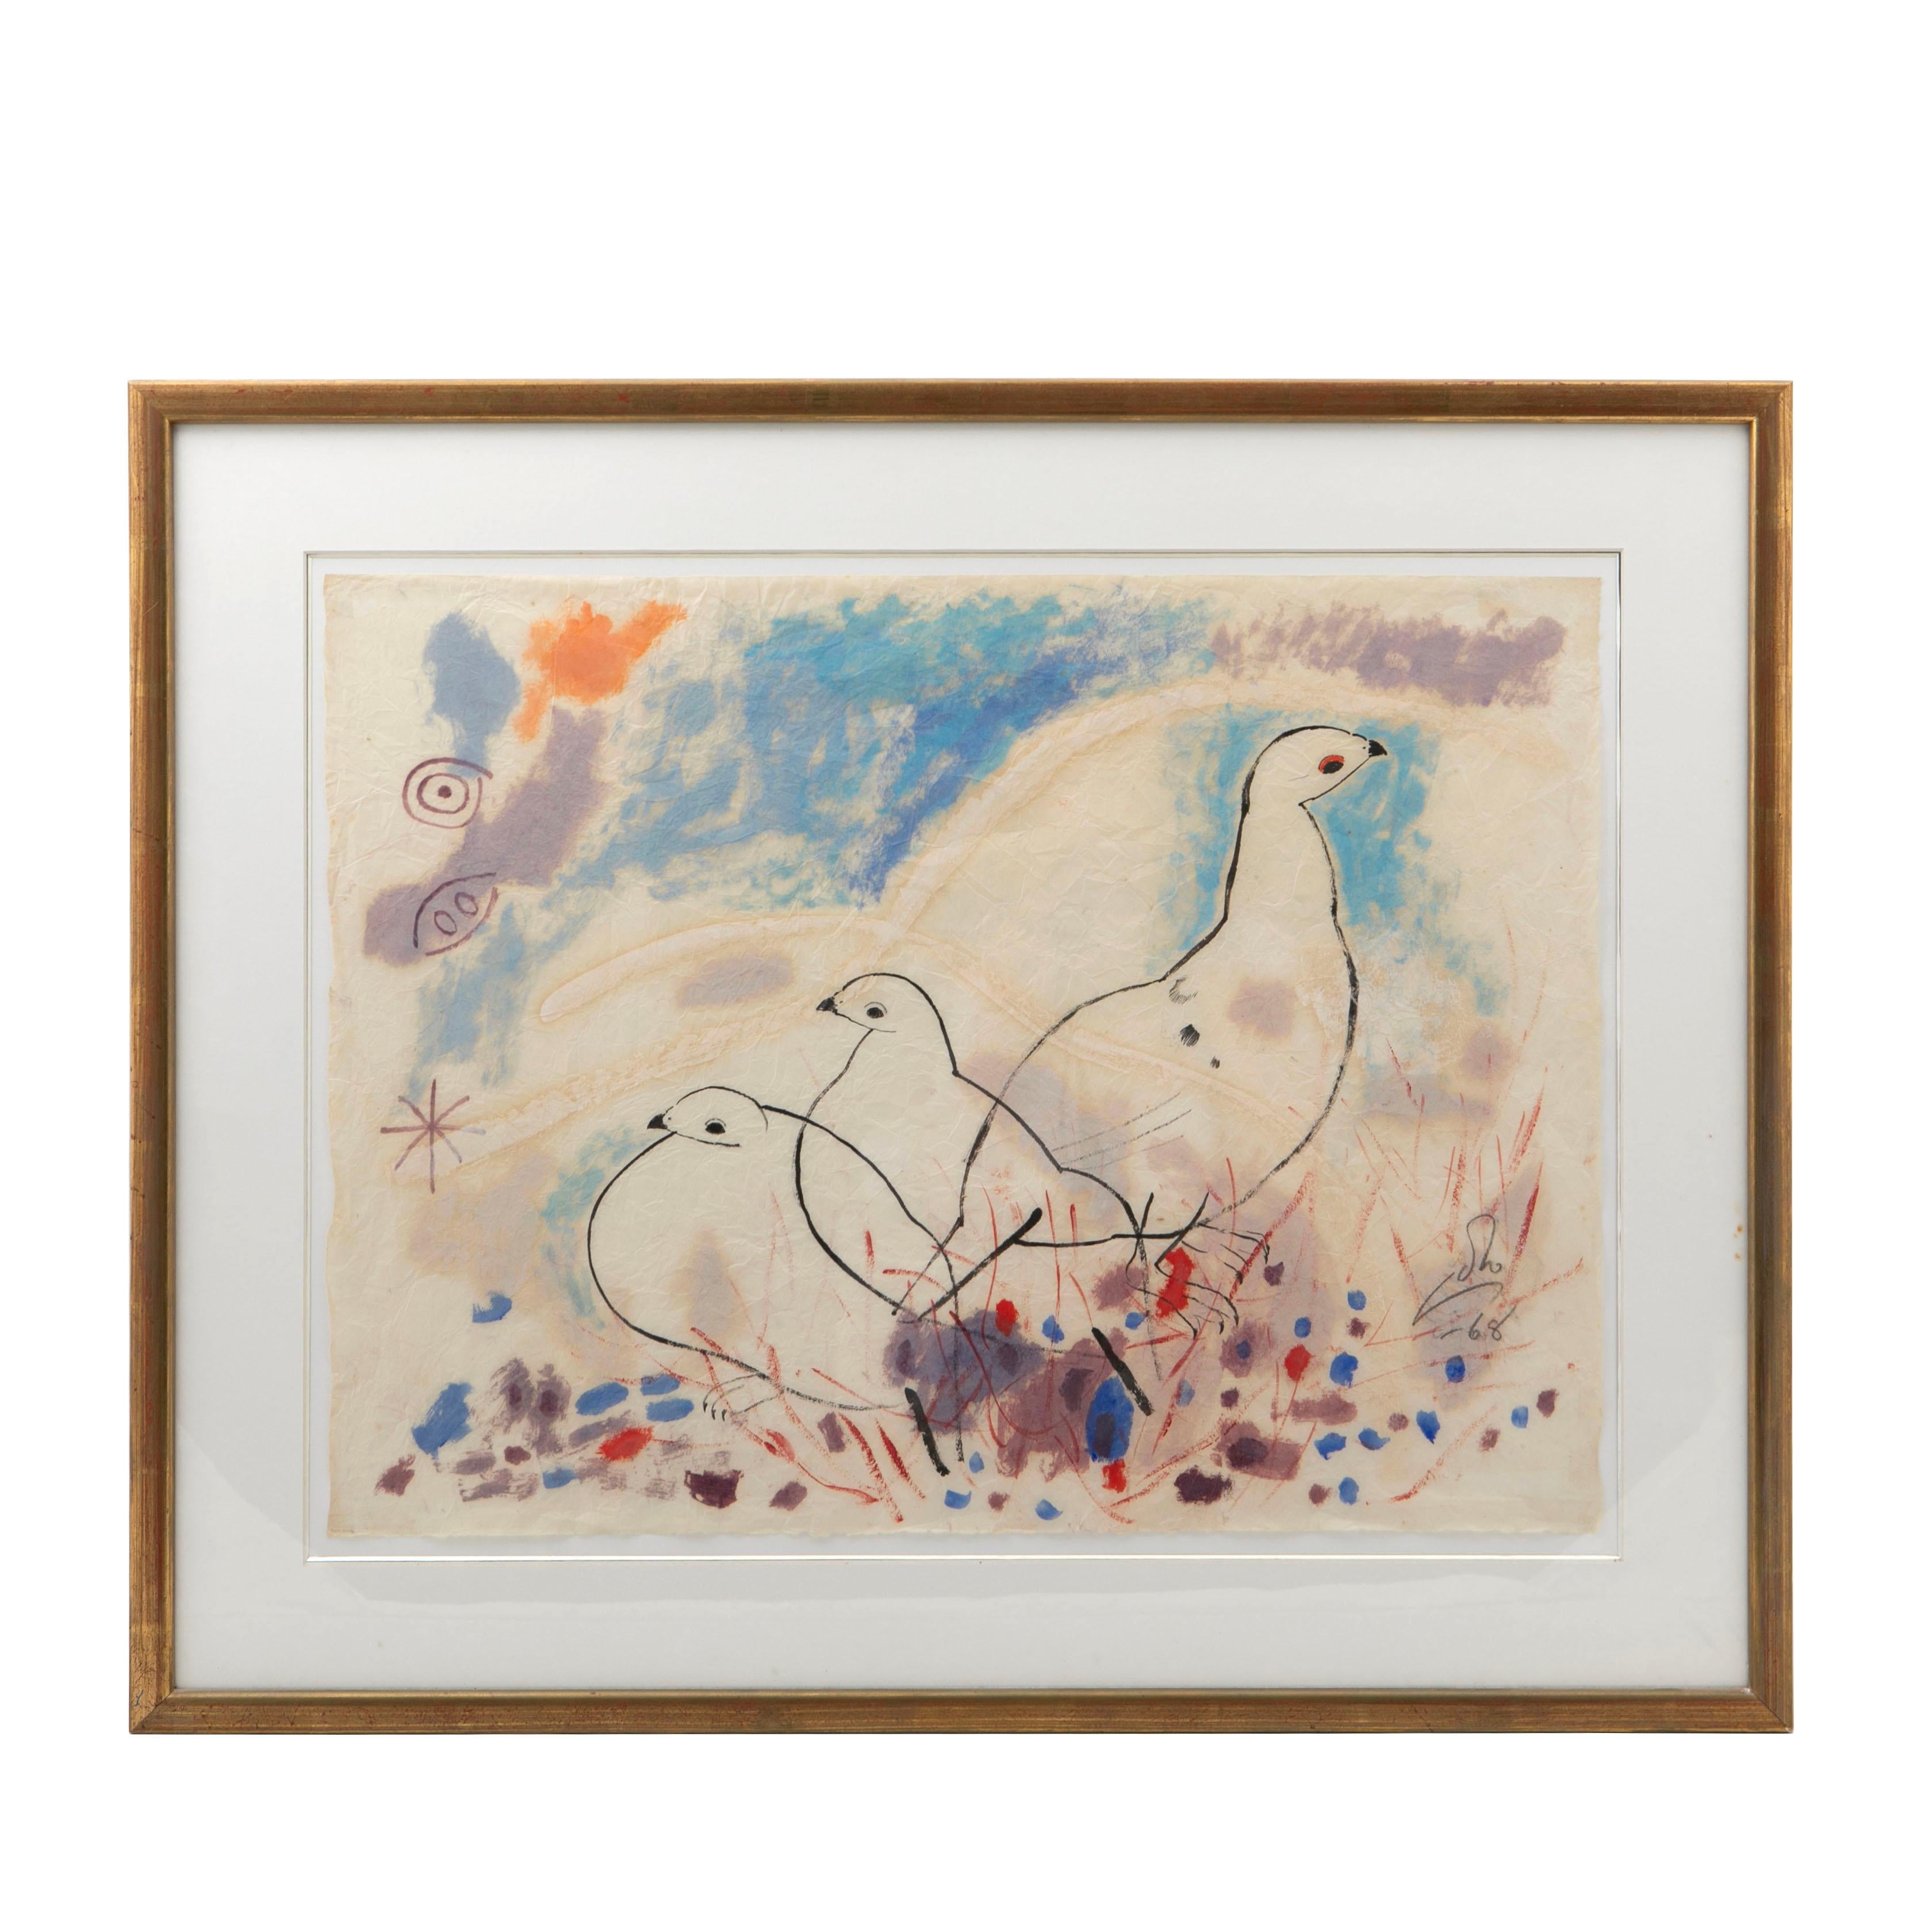 Aage Gitz-Johansen (Danish, 1897-1977)
Composition: Ptarmigans in Greenlandic Landscape. Gouache on handmade paper. Framed with passe-partout in a gilt wood frame with glass.

Sheet dimensions: 47x62 cm.  Frame dimensions: 65x81x2.5 cm.

Signed with